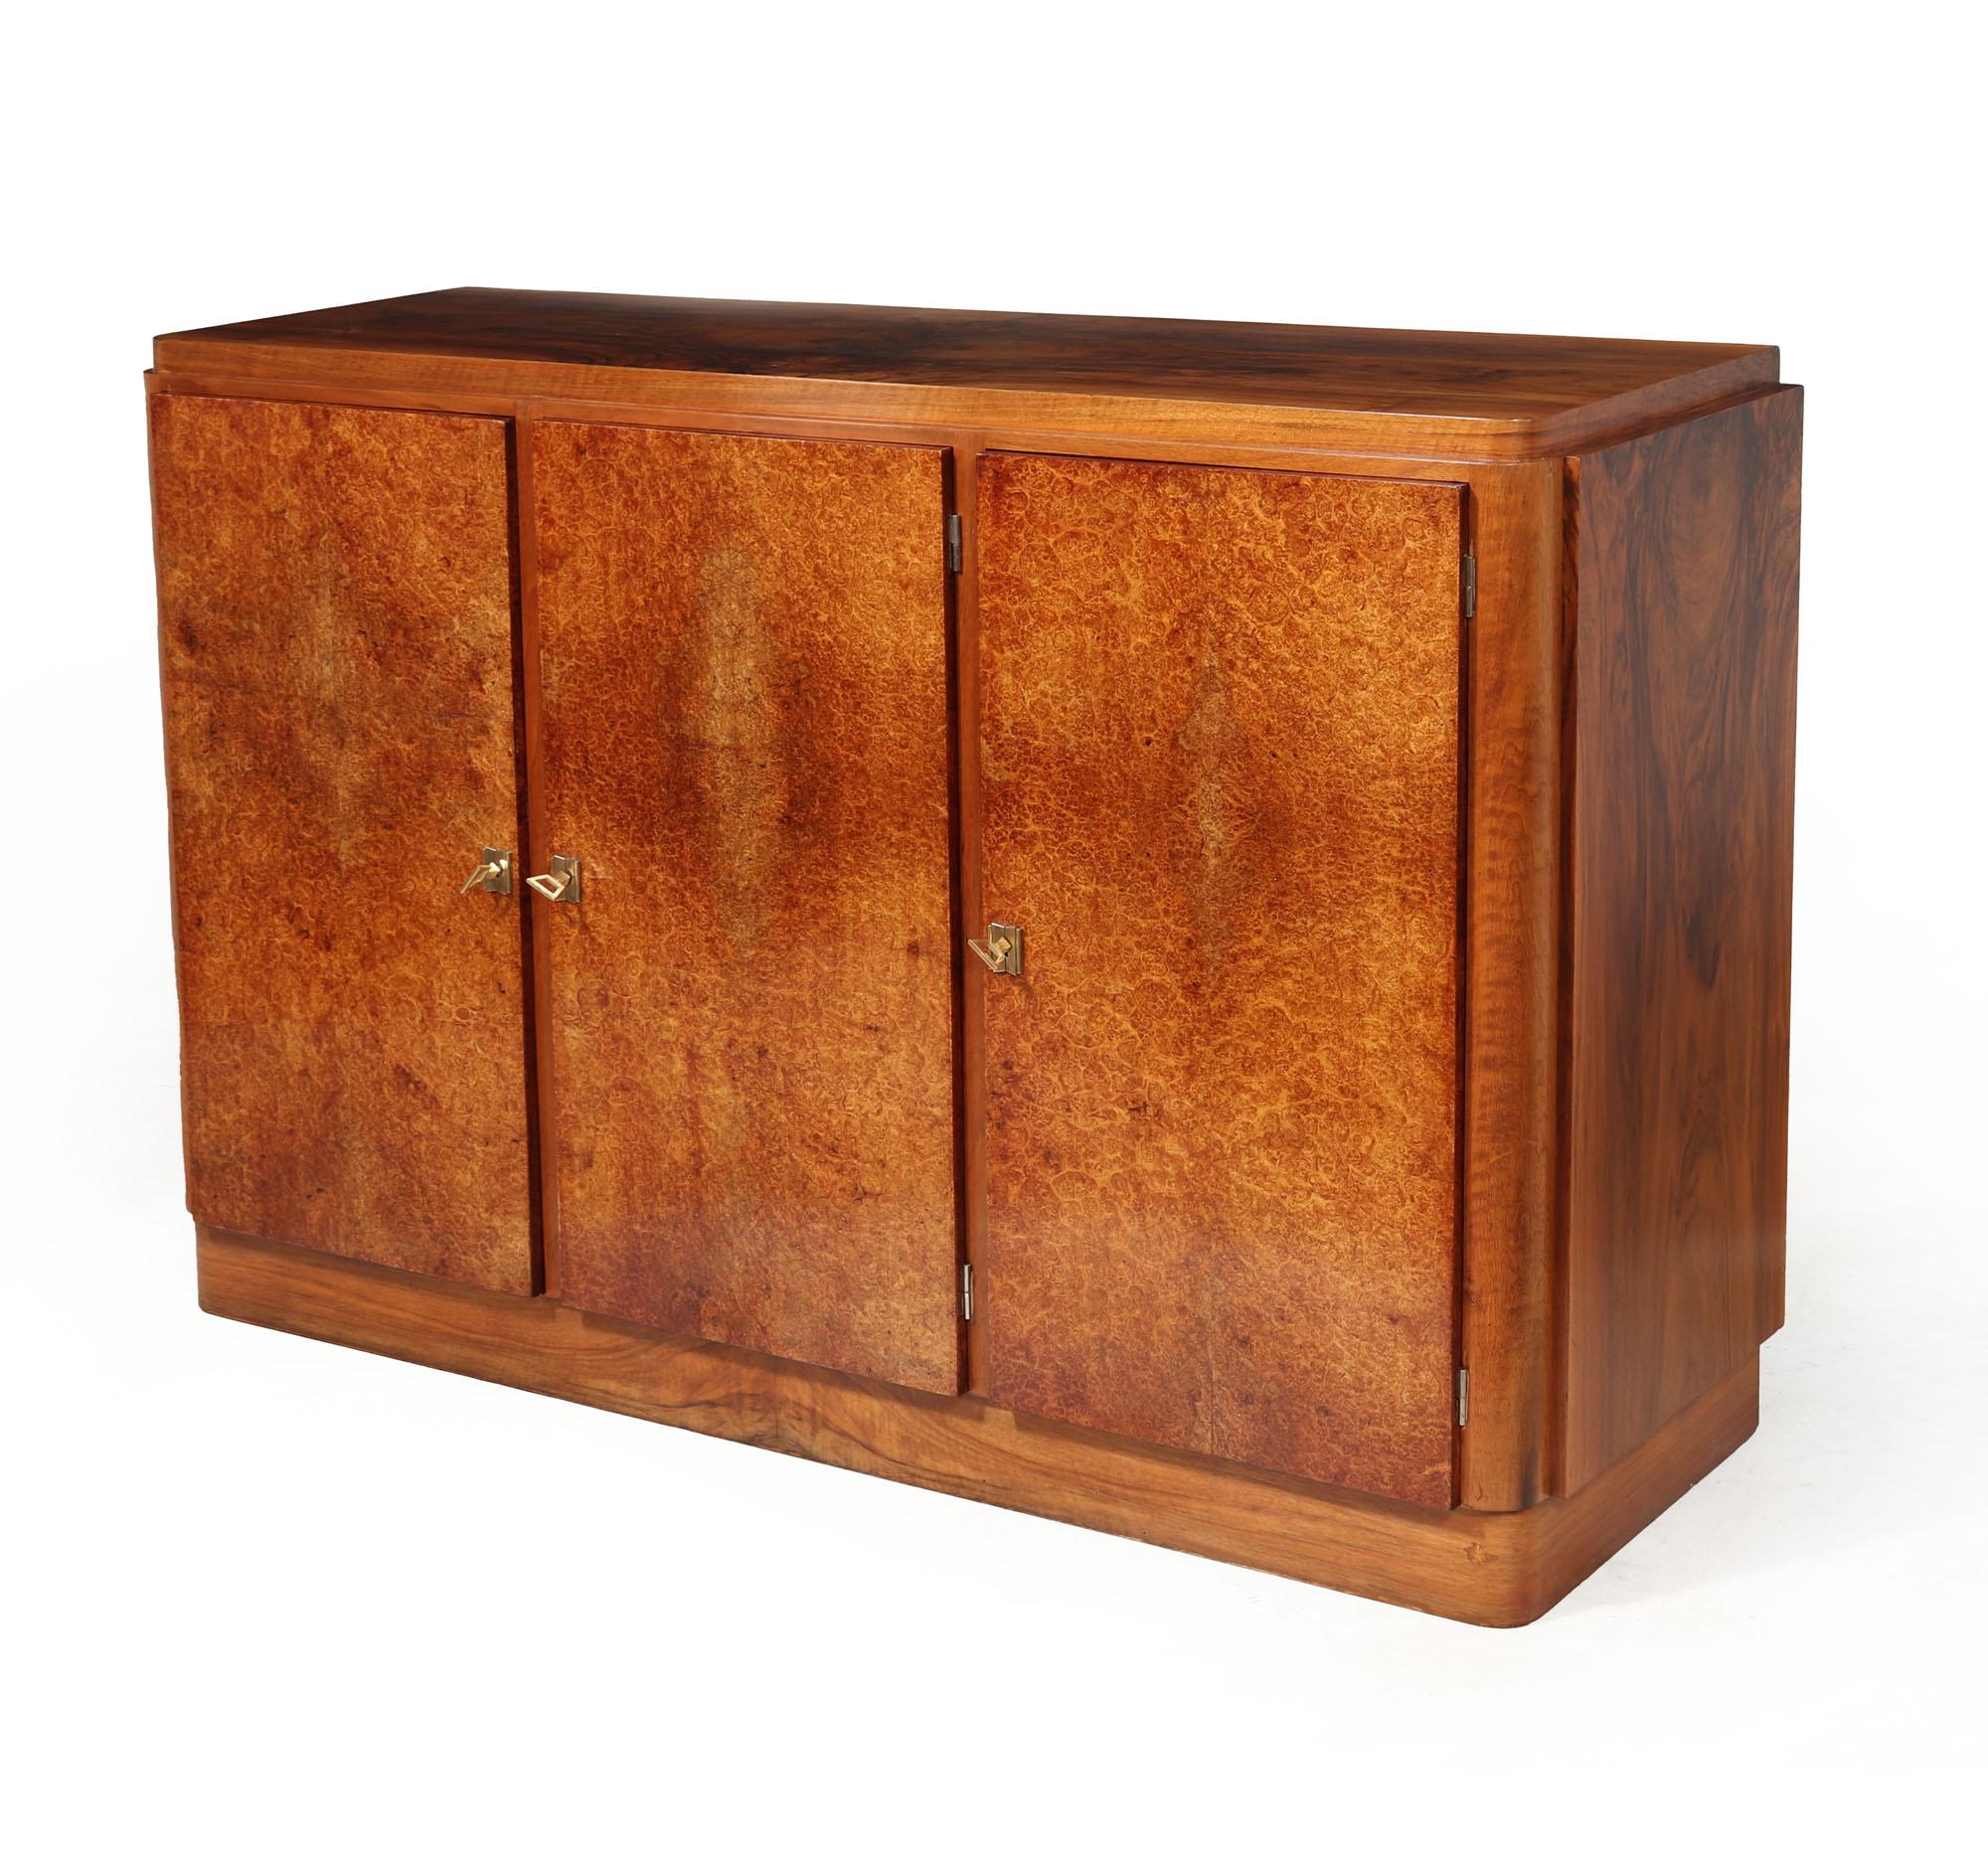 FRENCH ART DECO SIDEBOARD 
A stunning French Art Deco sideboard in walnut with highly figured Amboyna doors, each lockable with 3 keys two long adjustable height shelves behind, the sideboard has been carefully restored and fully polished by hand